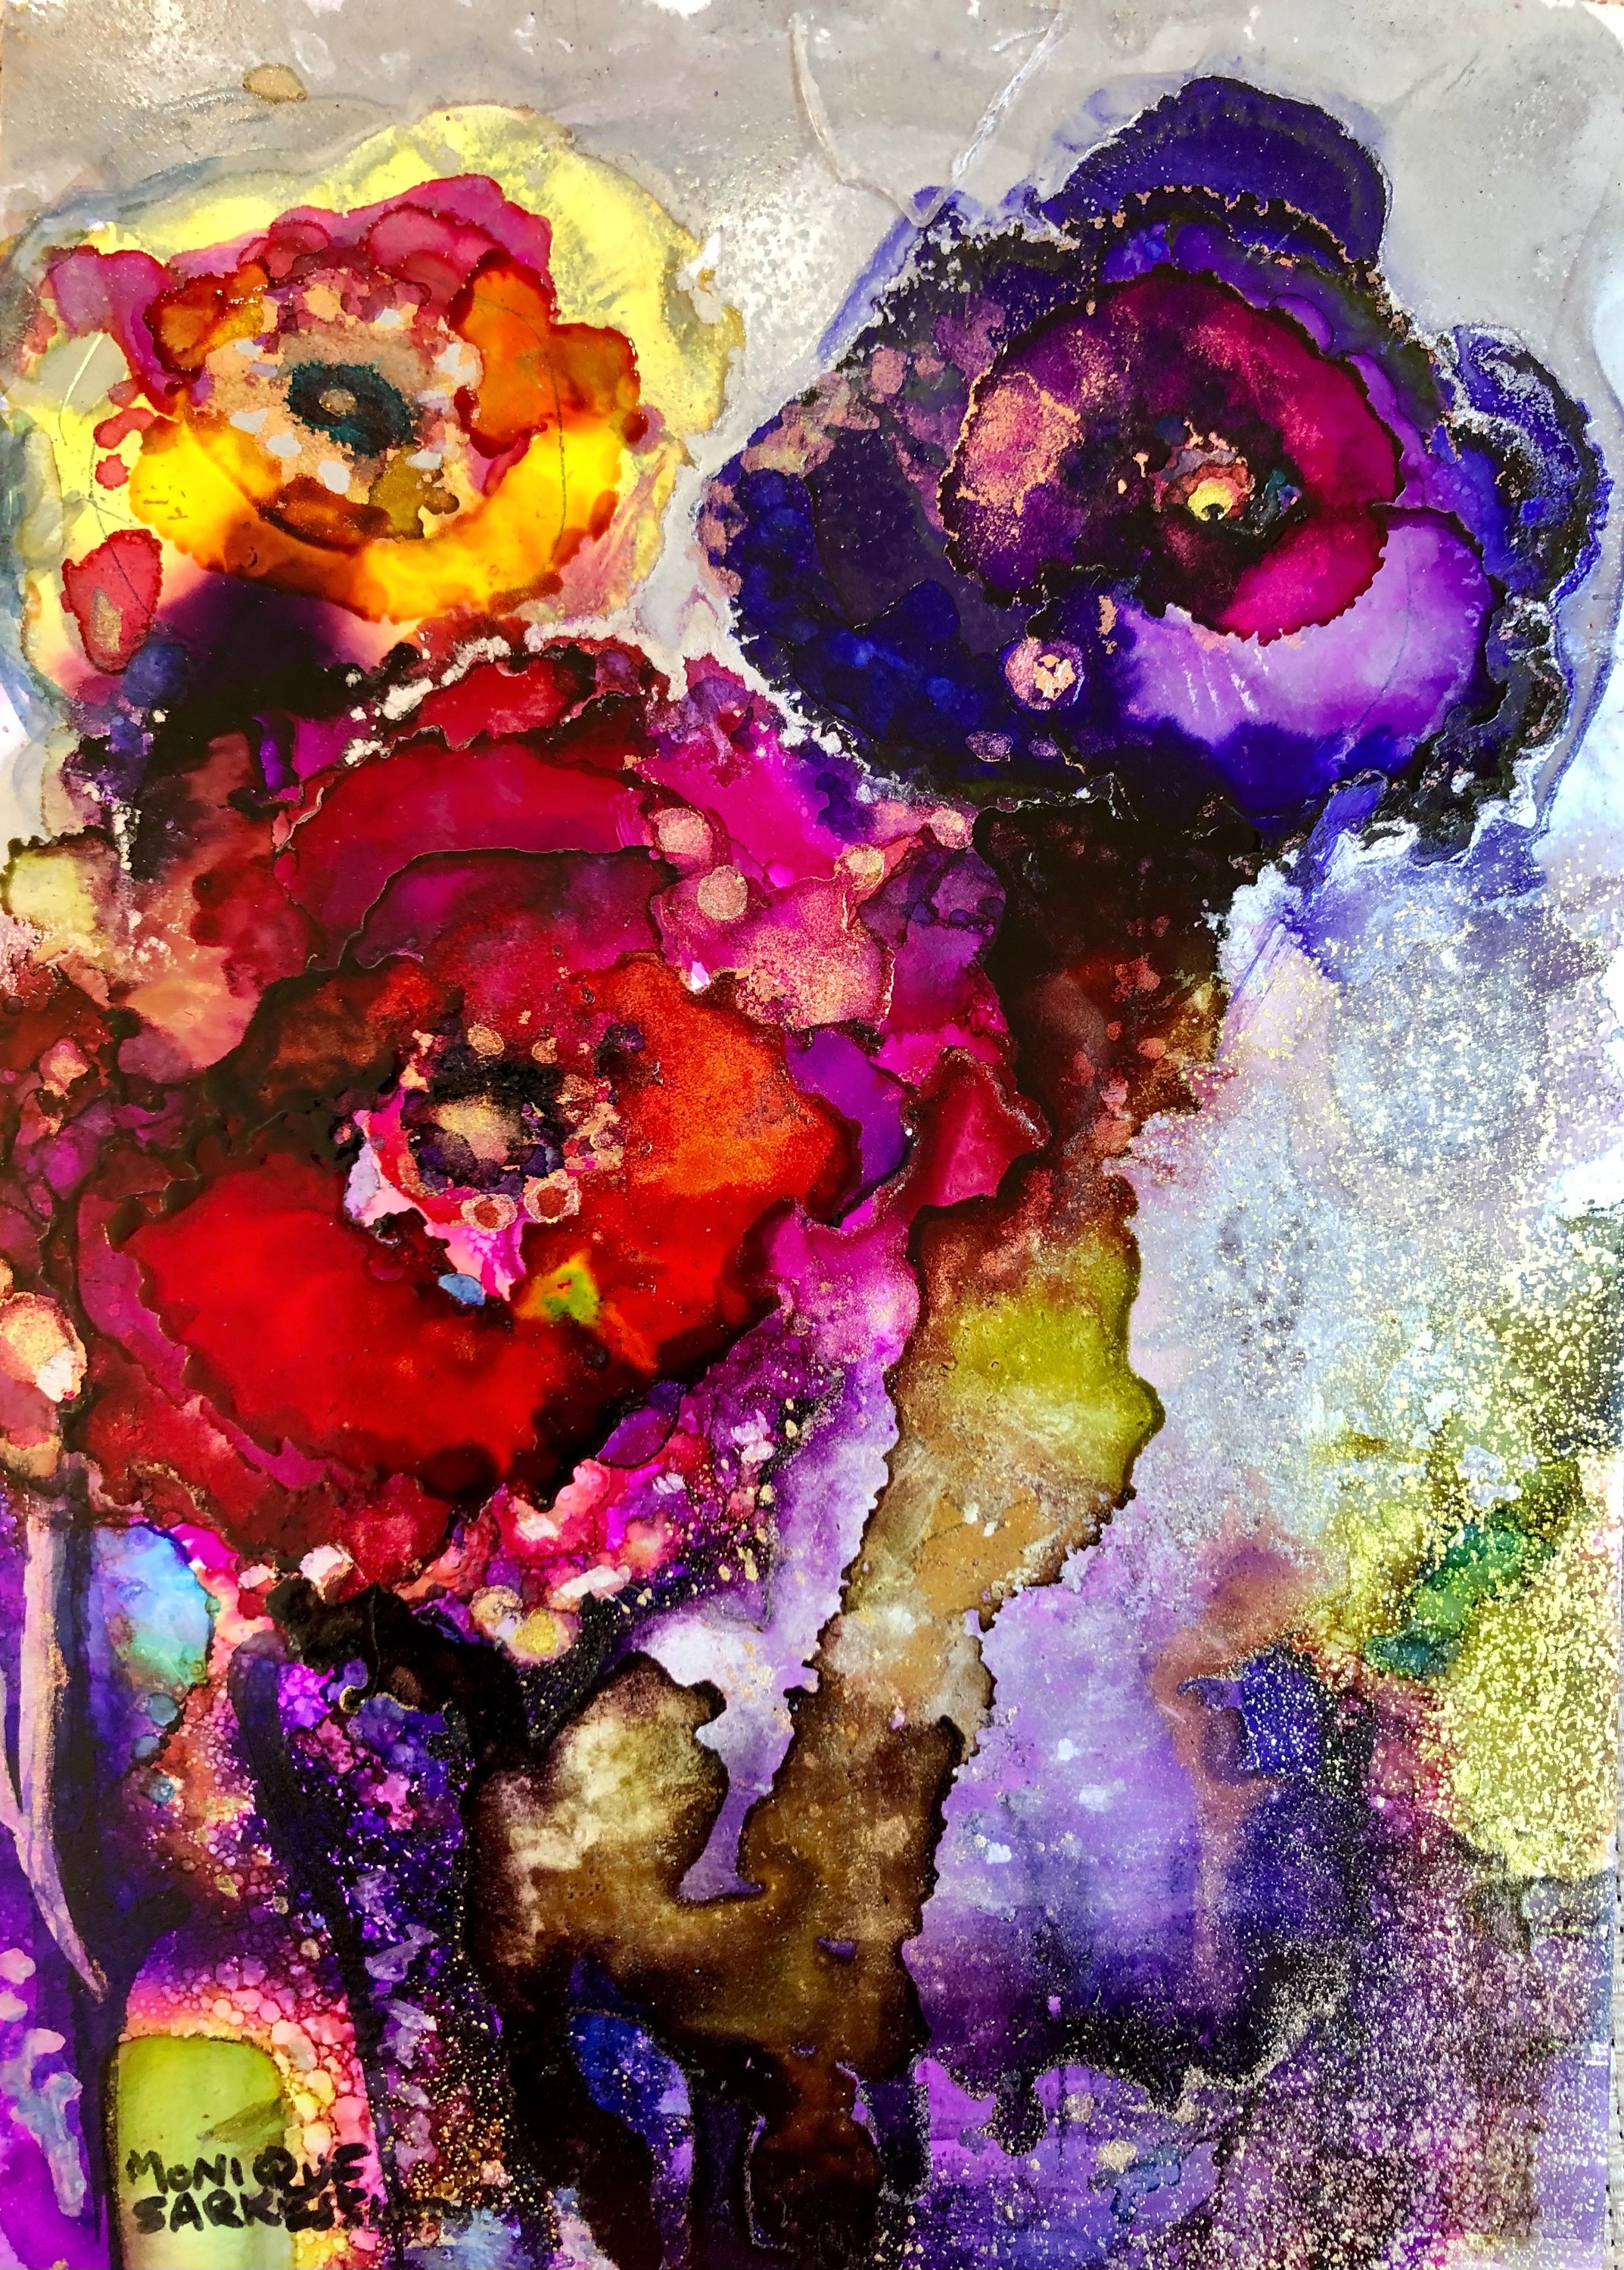 Glory carriers 17 alcohol ink and mixed media on wood 7x5 atbl4k